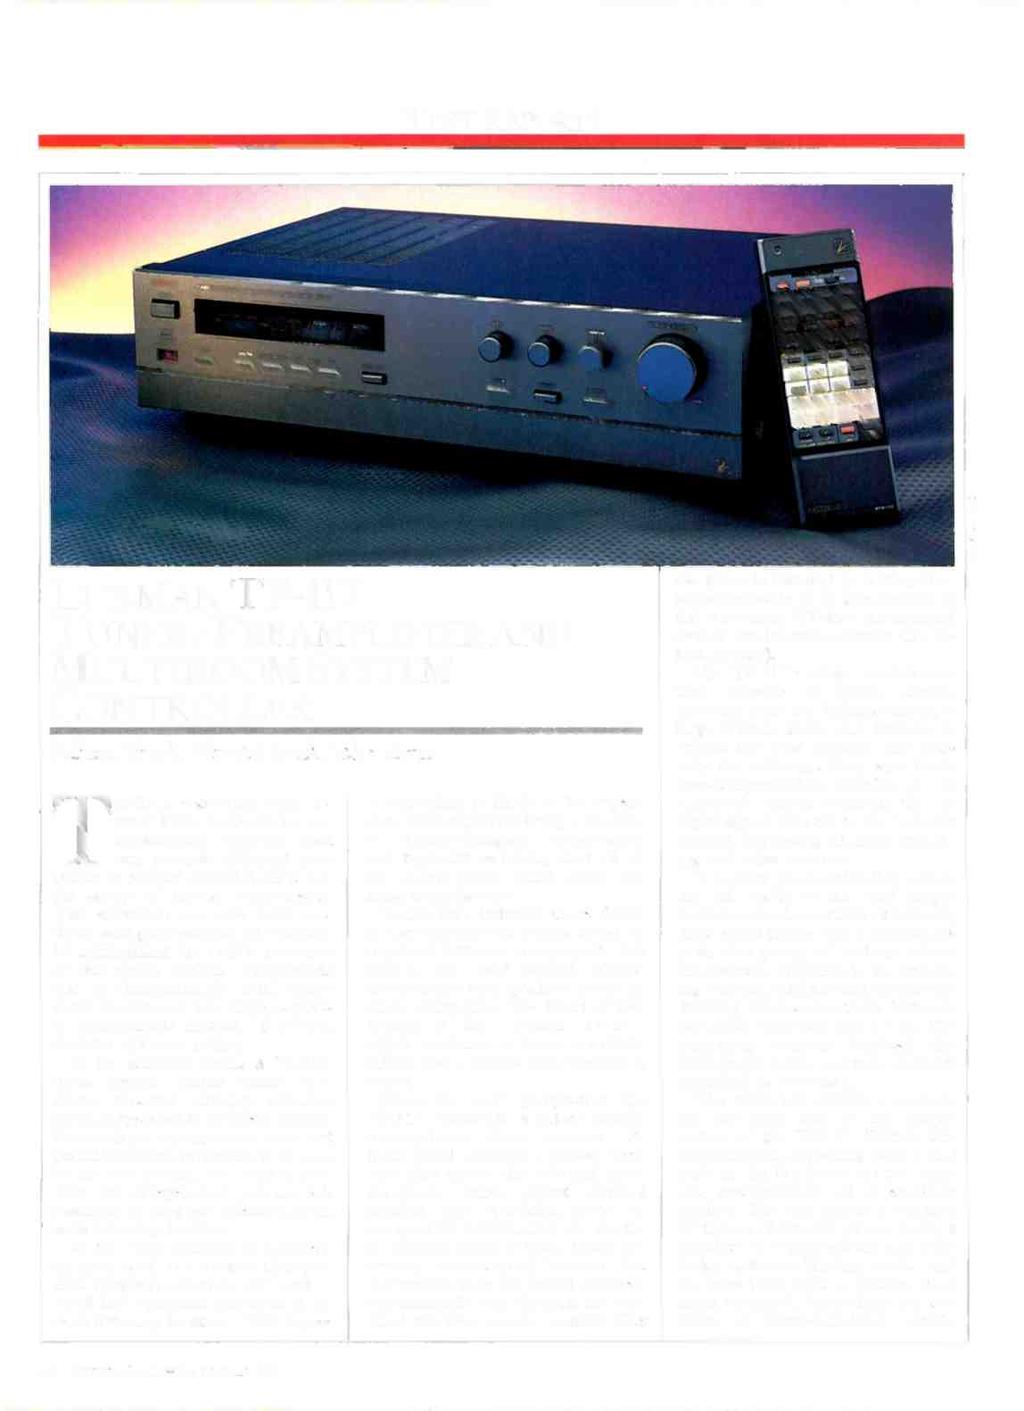 TEST REPORT'S LUXMAN TP-117 TUNER/PREAMPLIFIER AND MULTIROOM SYSTEM CONTROLLER Julian Hirsch, Hirsch -Houck Laboratories THERE is a growing trend toward home audio/video entertainment systems that